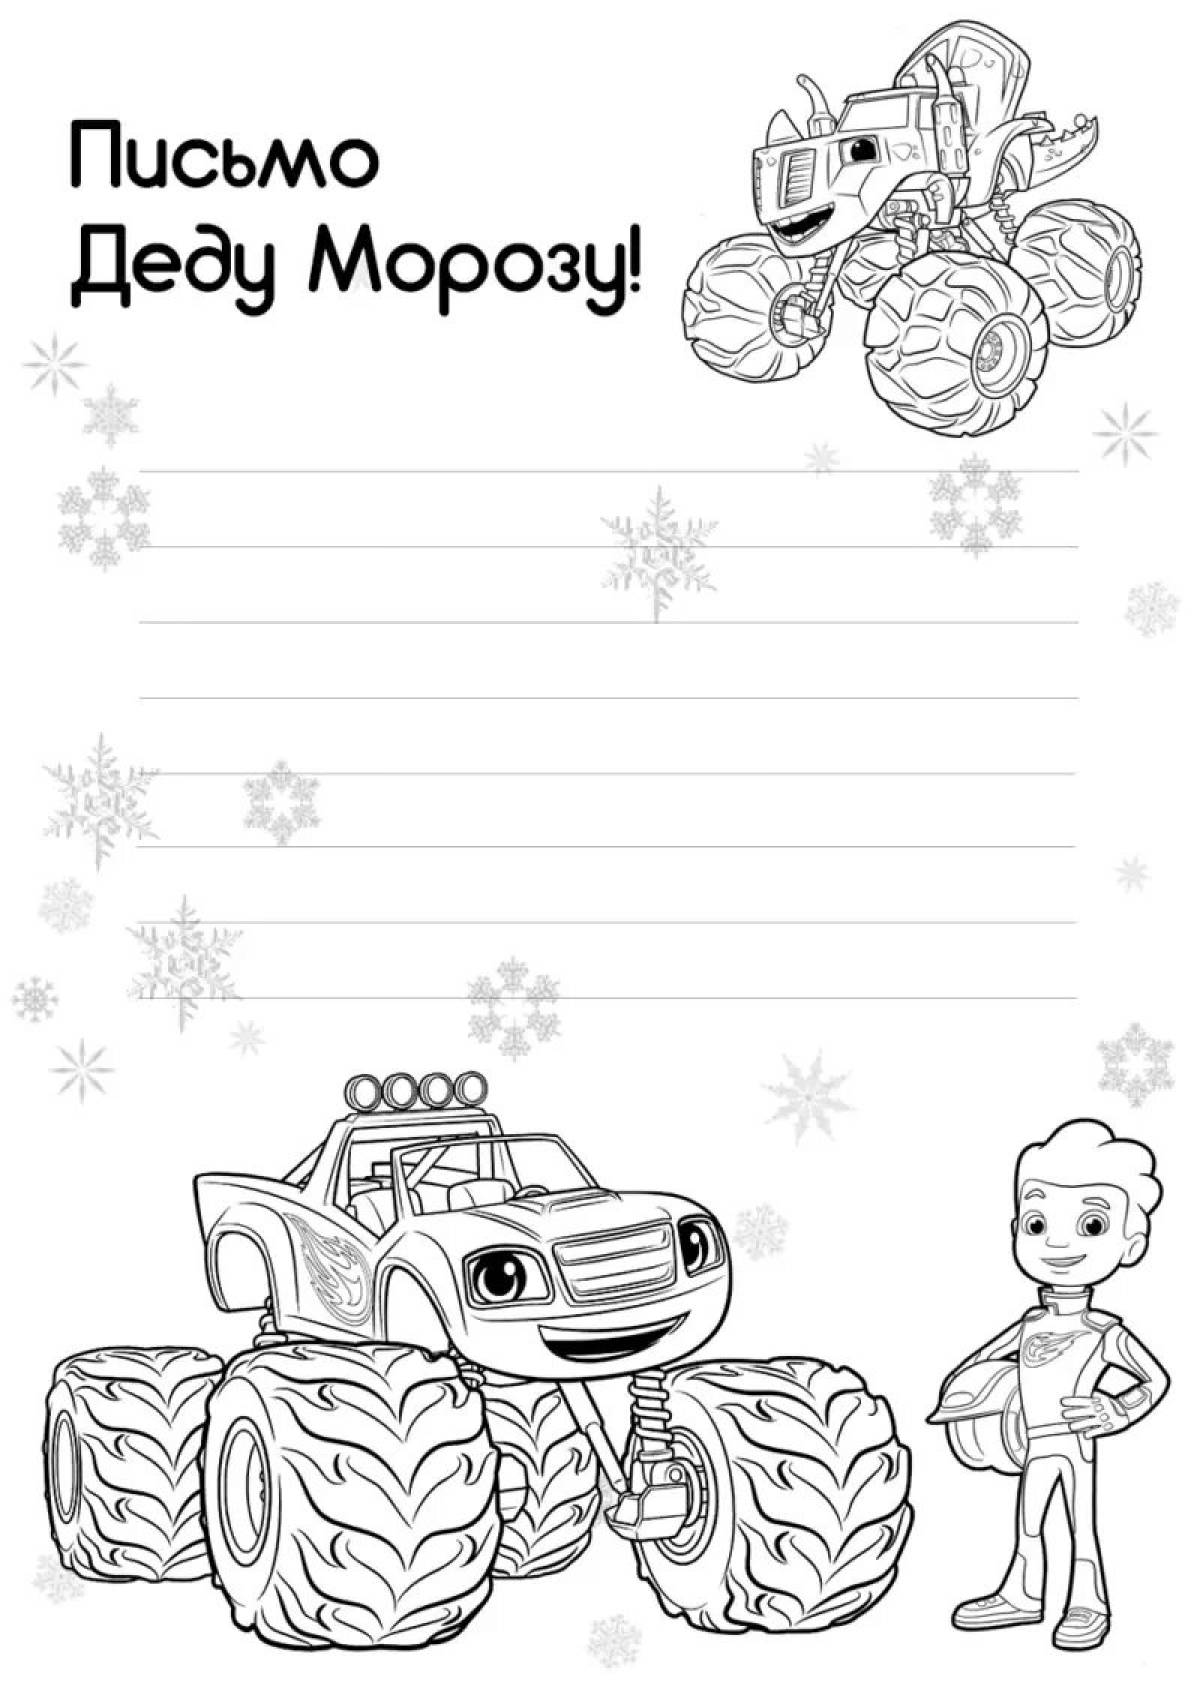 Playful coloring letter template to santa claus